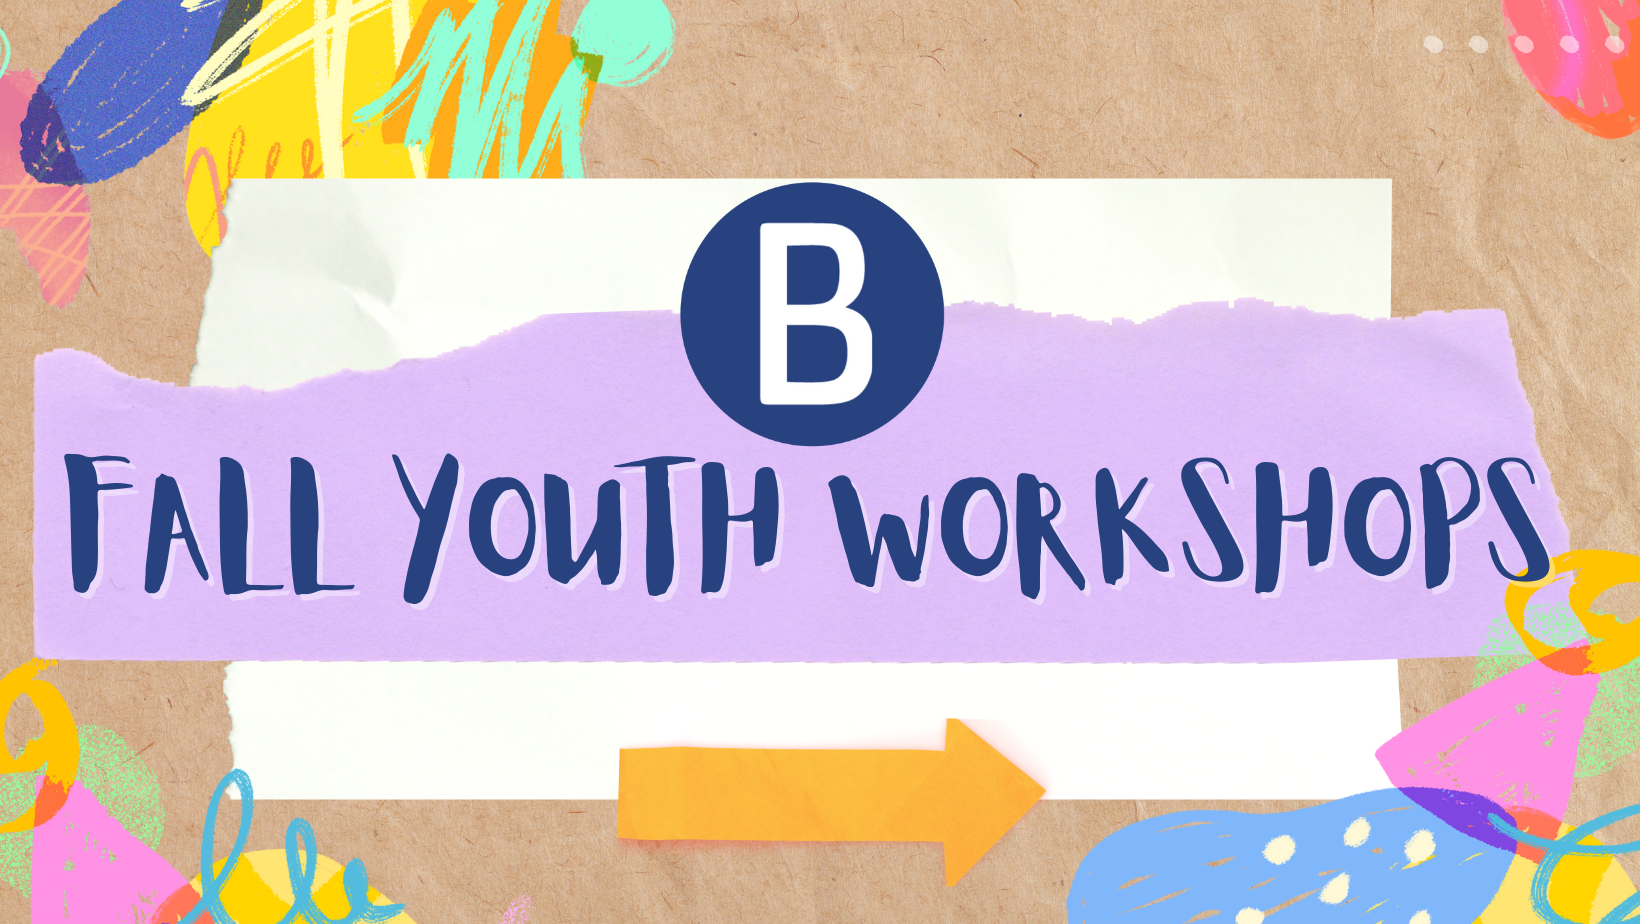 Fall youth workshop cover